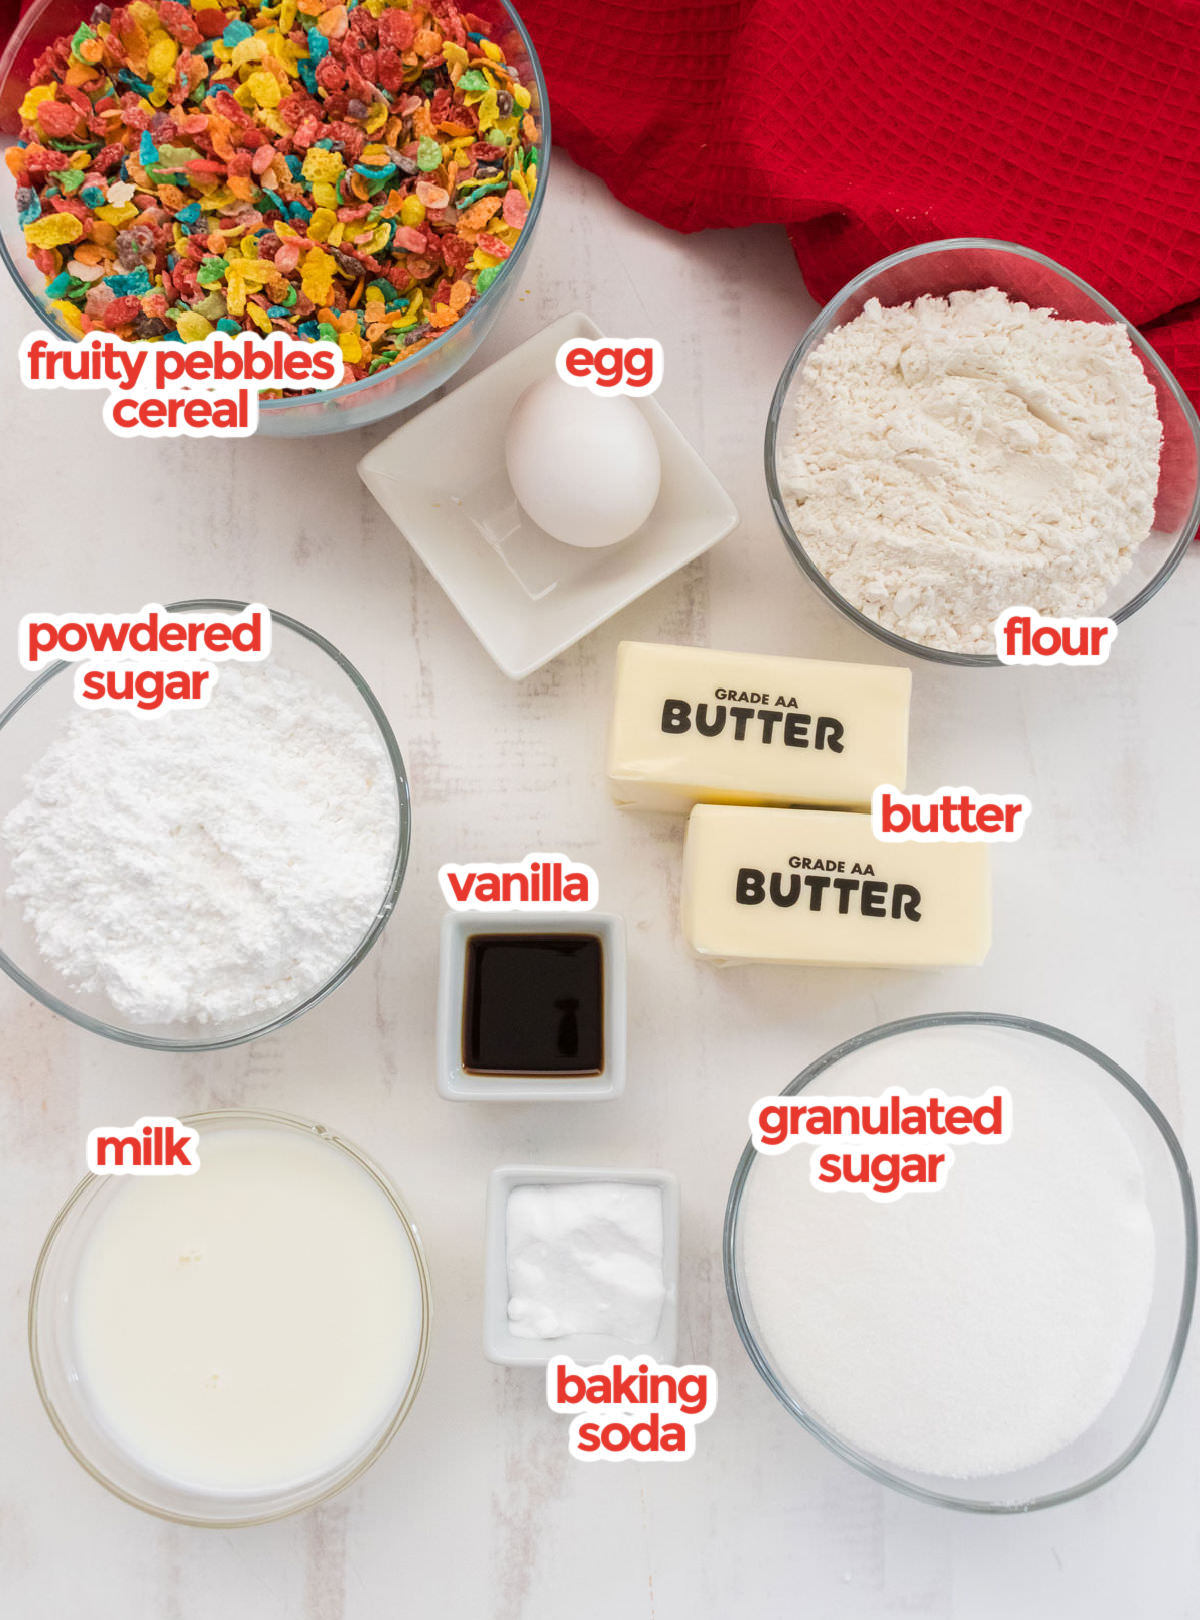 All the ingredients you will need to make Fruity Pebbles Sugar Cookies including Fruity Pebbles Cereal, Granulated Sugar, Butter, Egg, Vanilla, Baking Soda, Flour, Powdered Sugar and Milk.